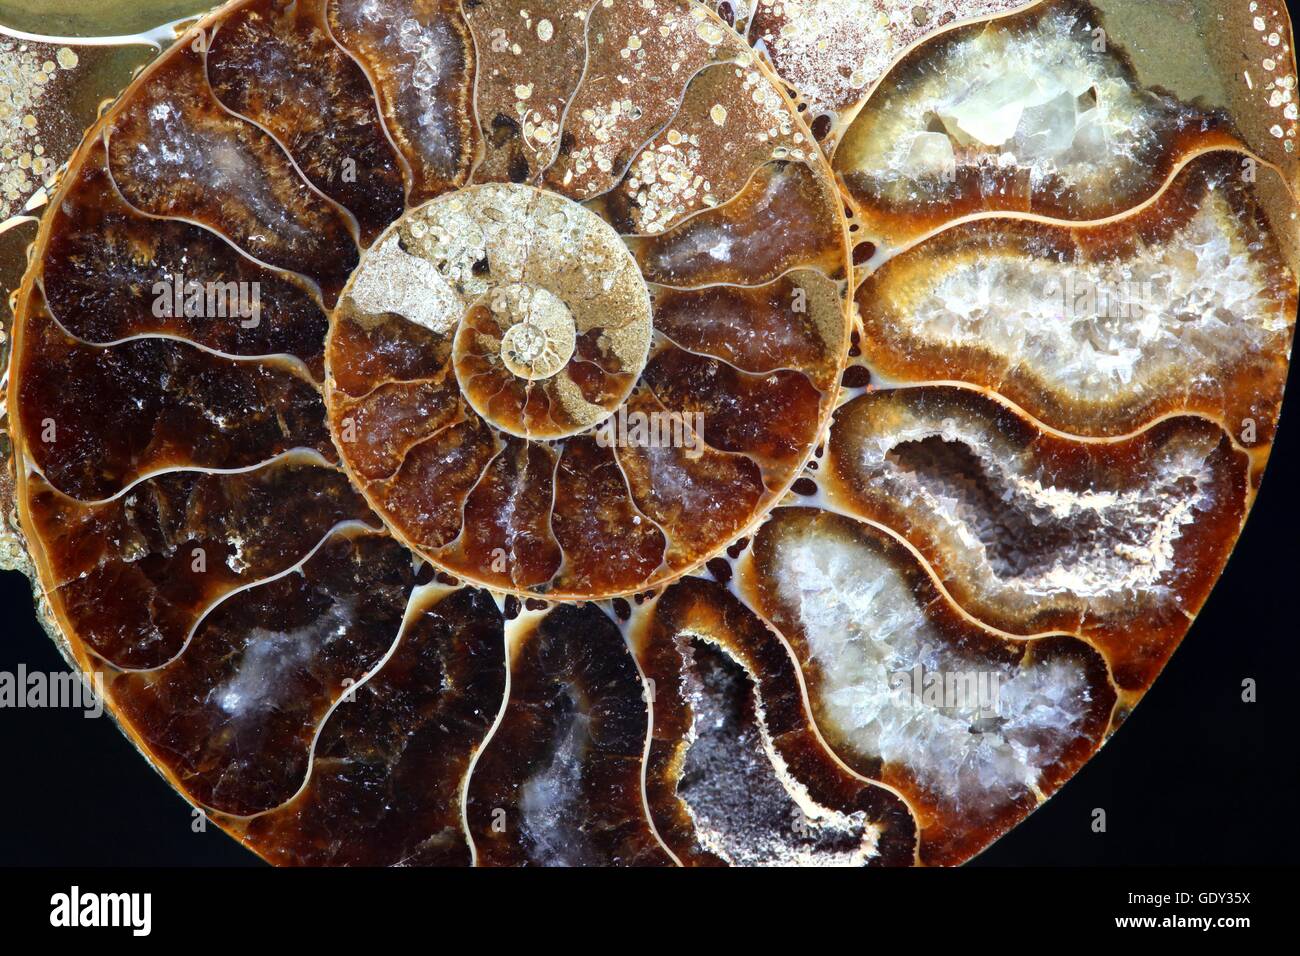 Ammonite fossile Banque D'Images